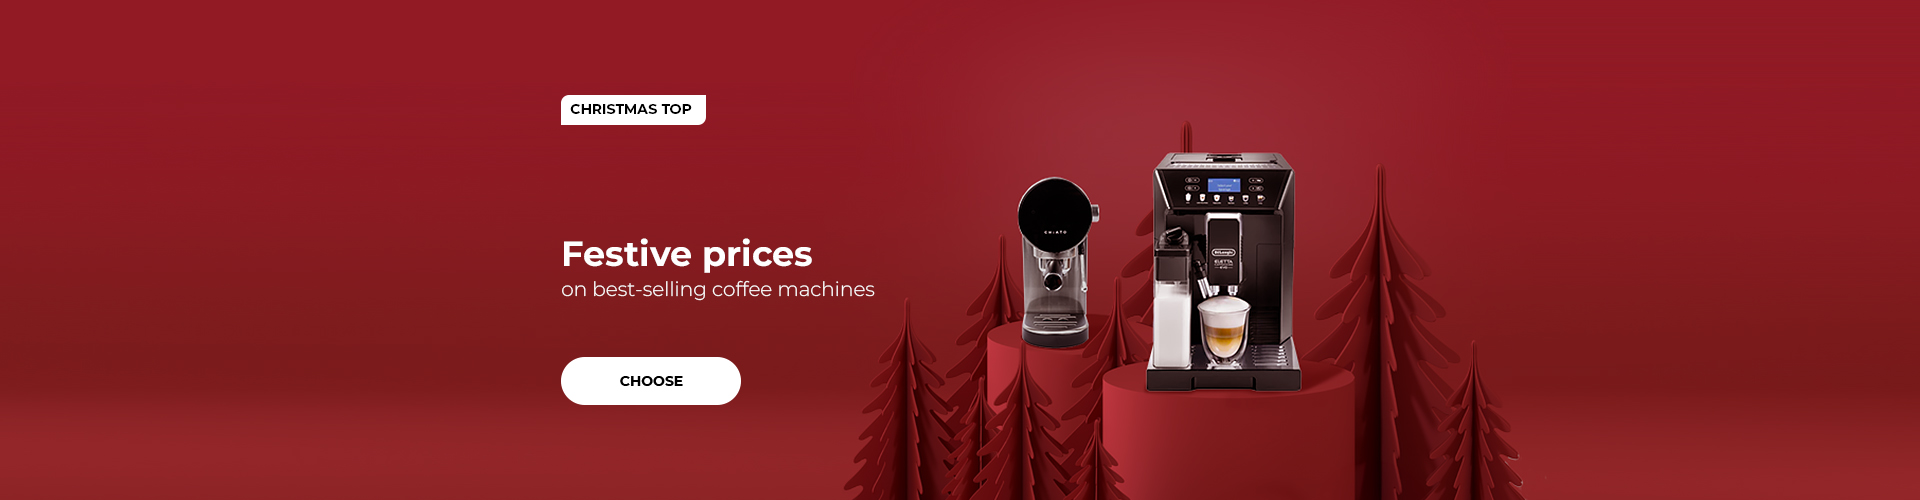 Festive prices on best-selling coffee machines